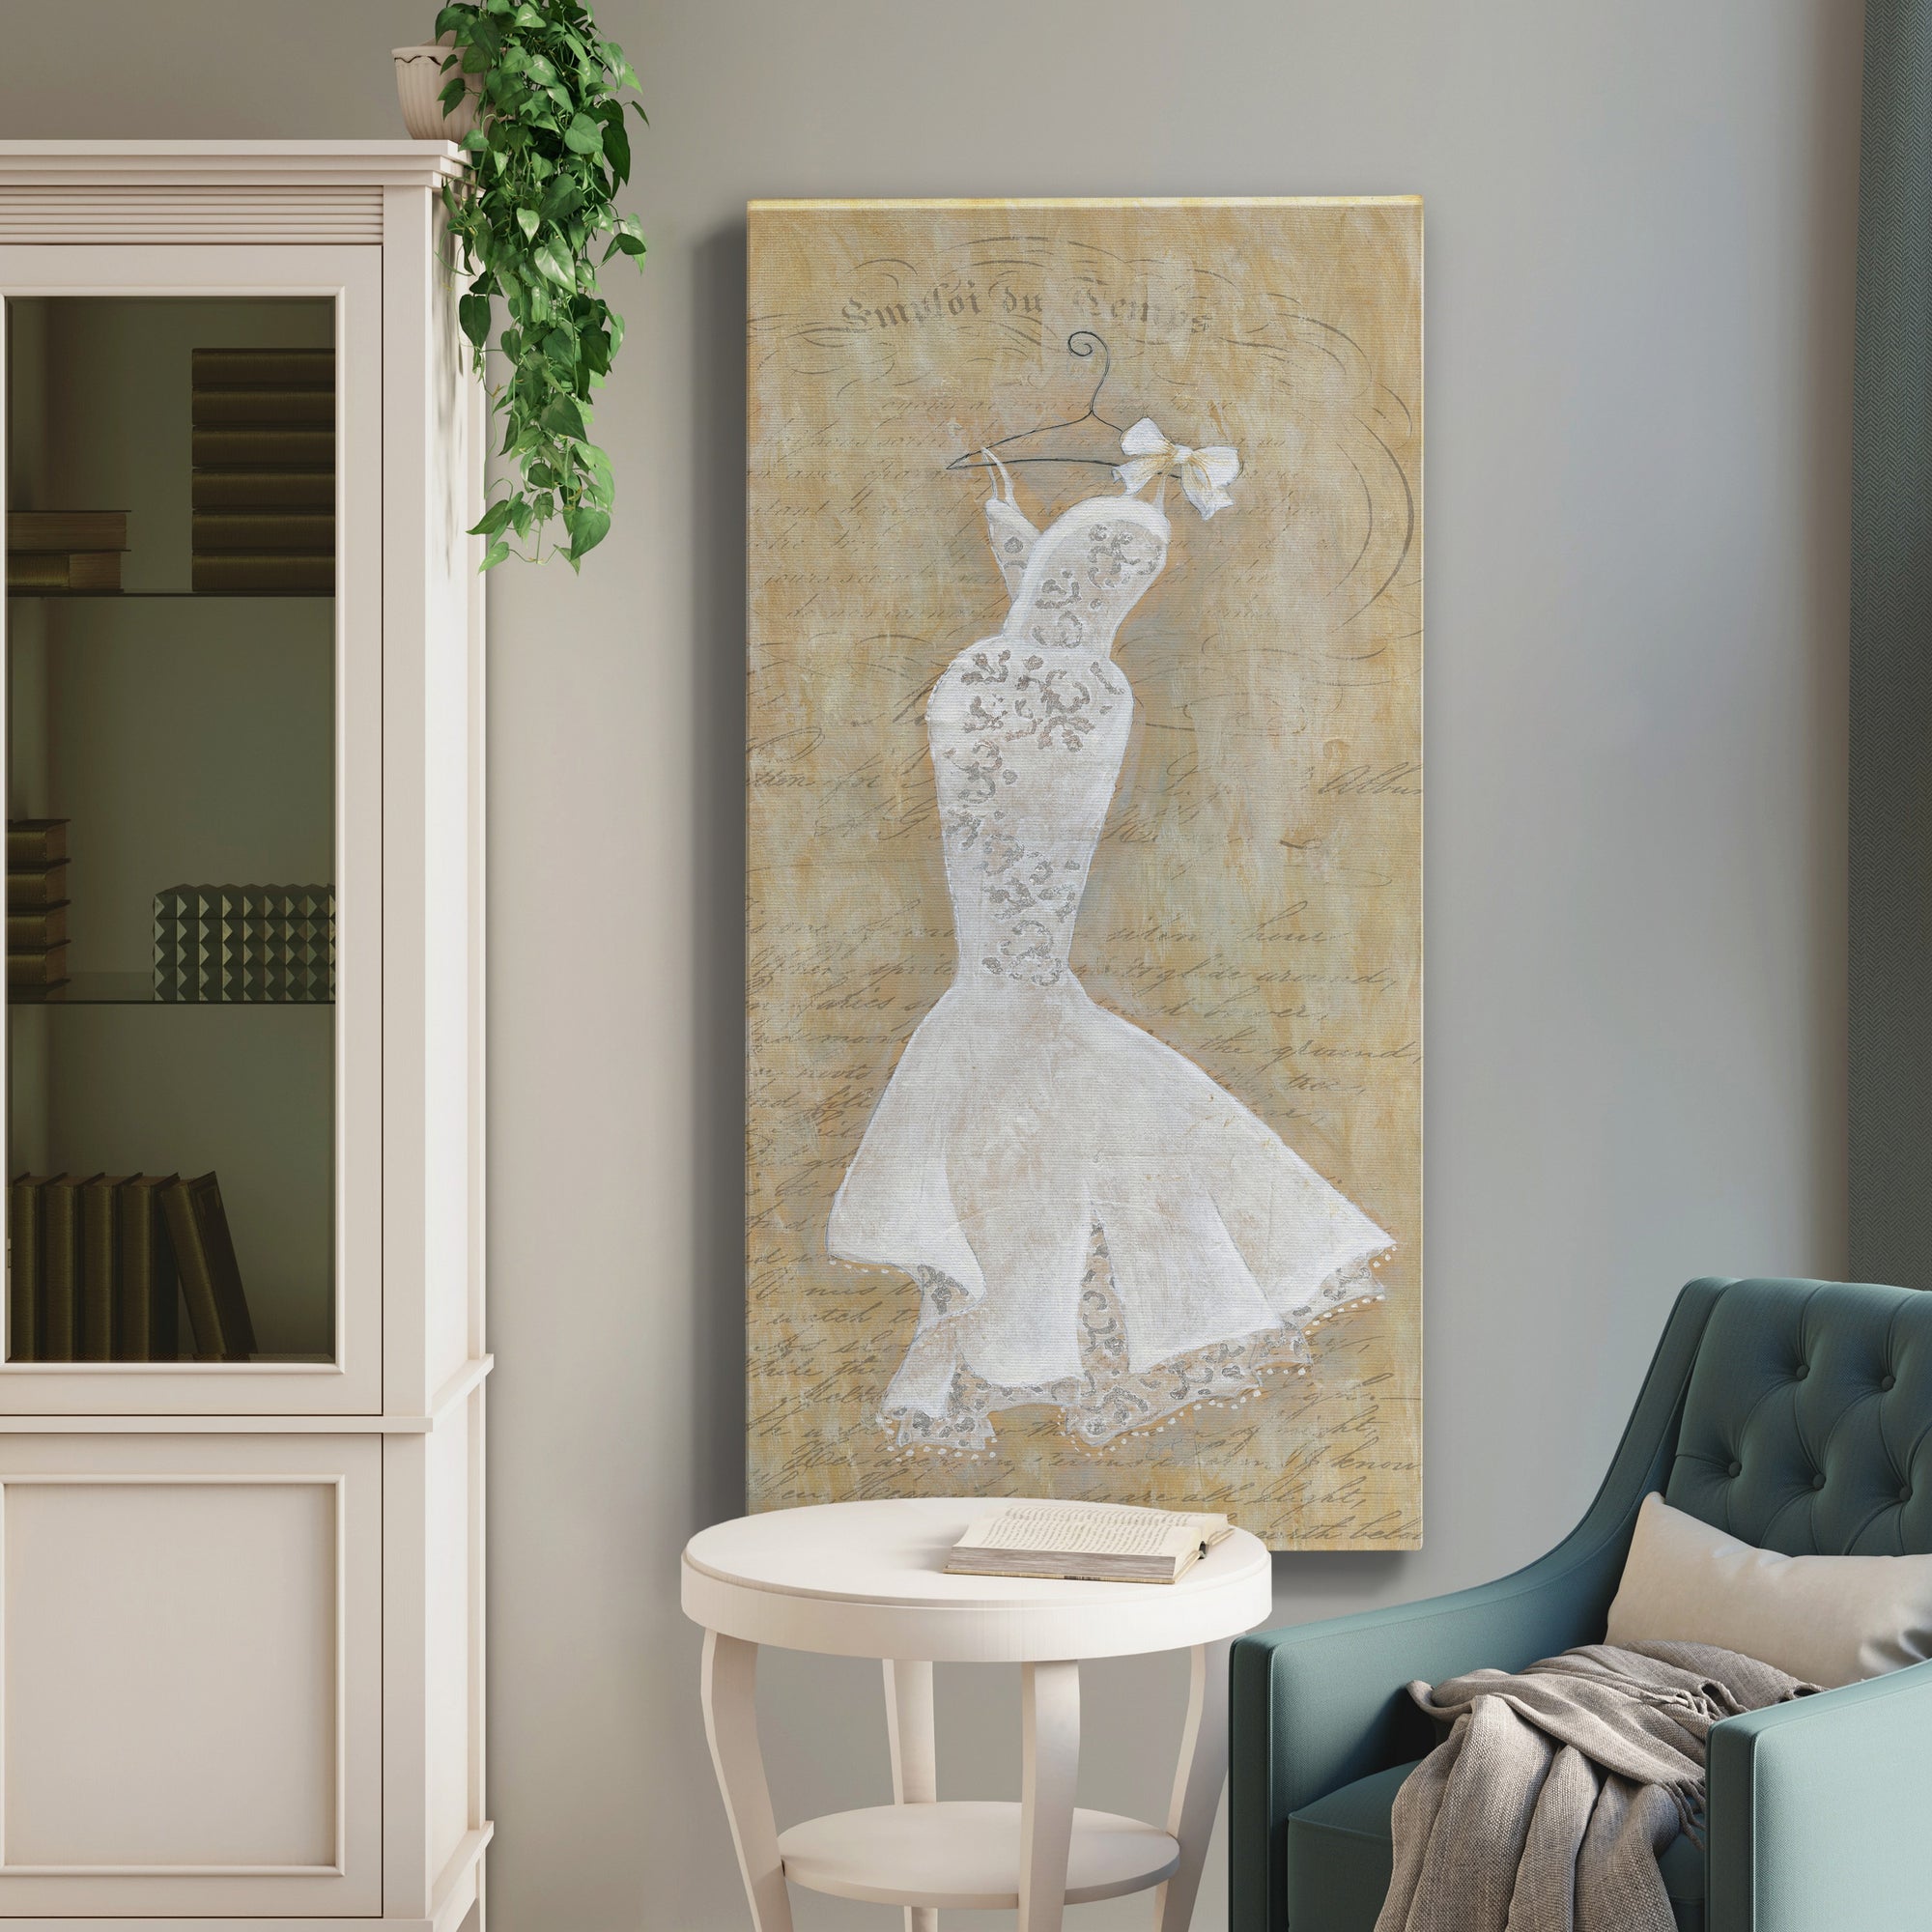 Silver Wedding III - Premium Gallery Wrapped Canvas - Ready to Hang